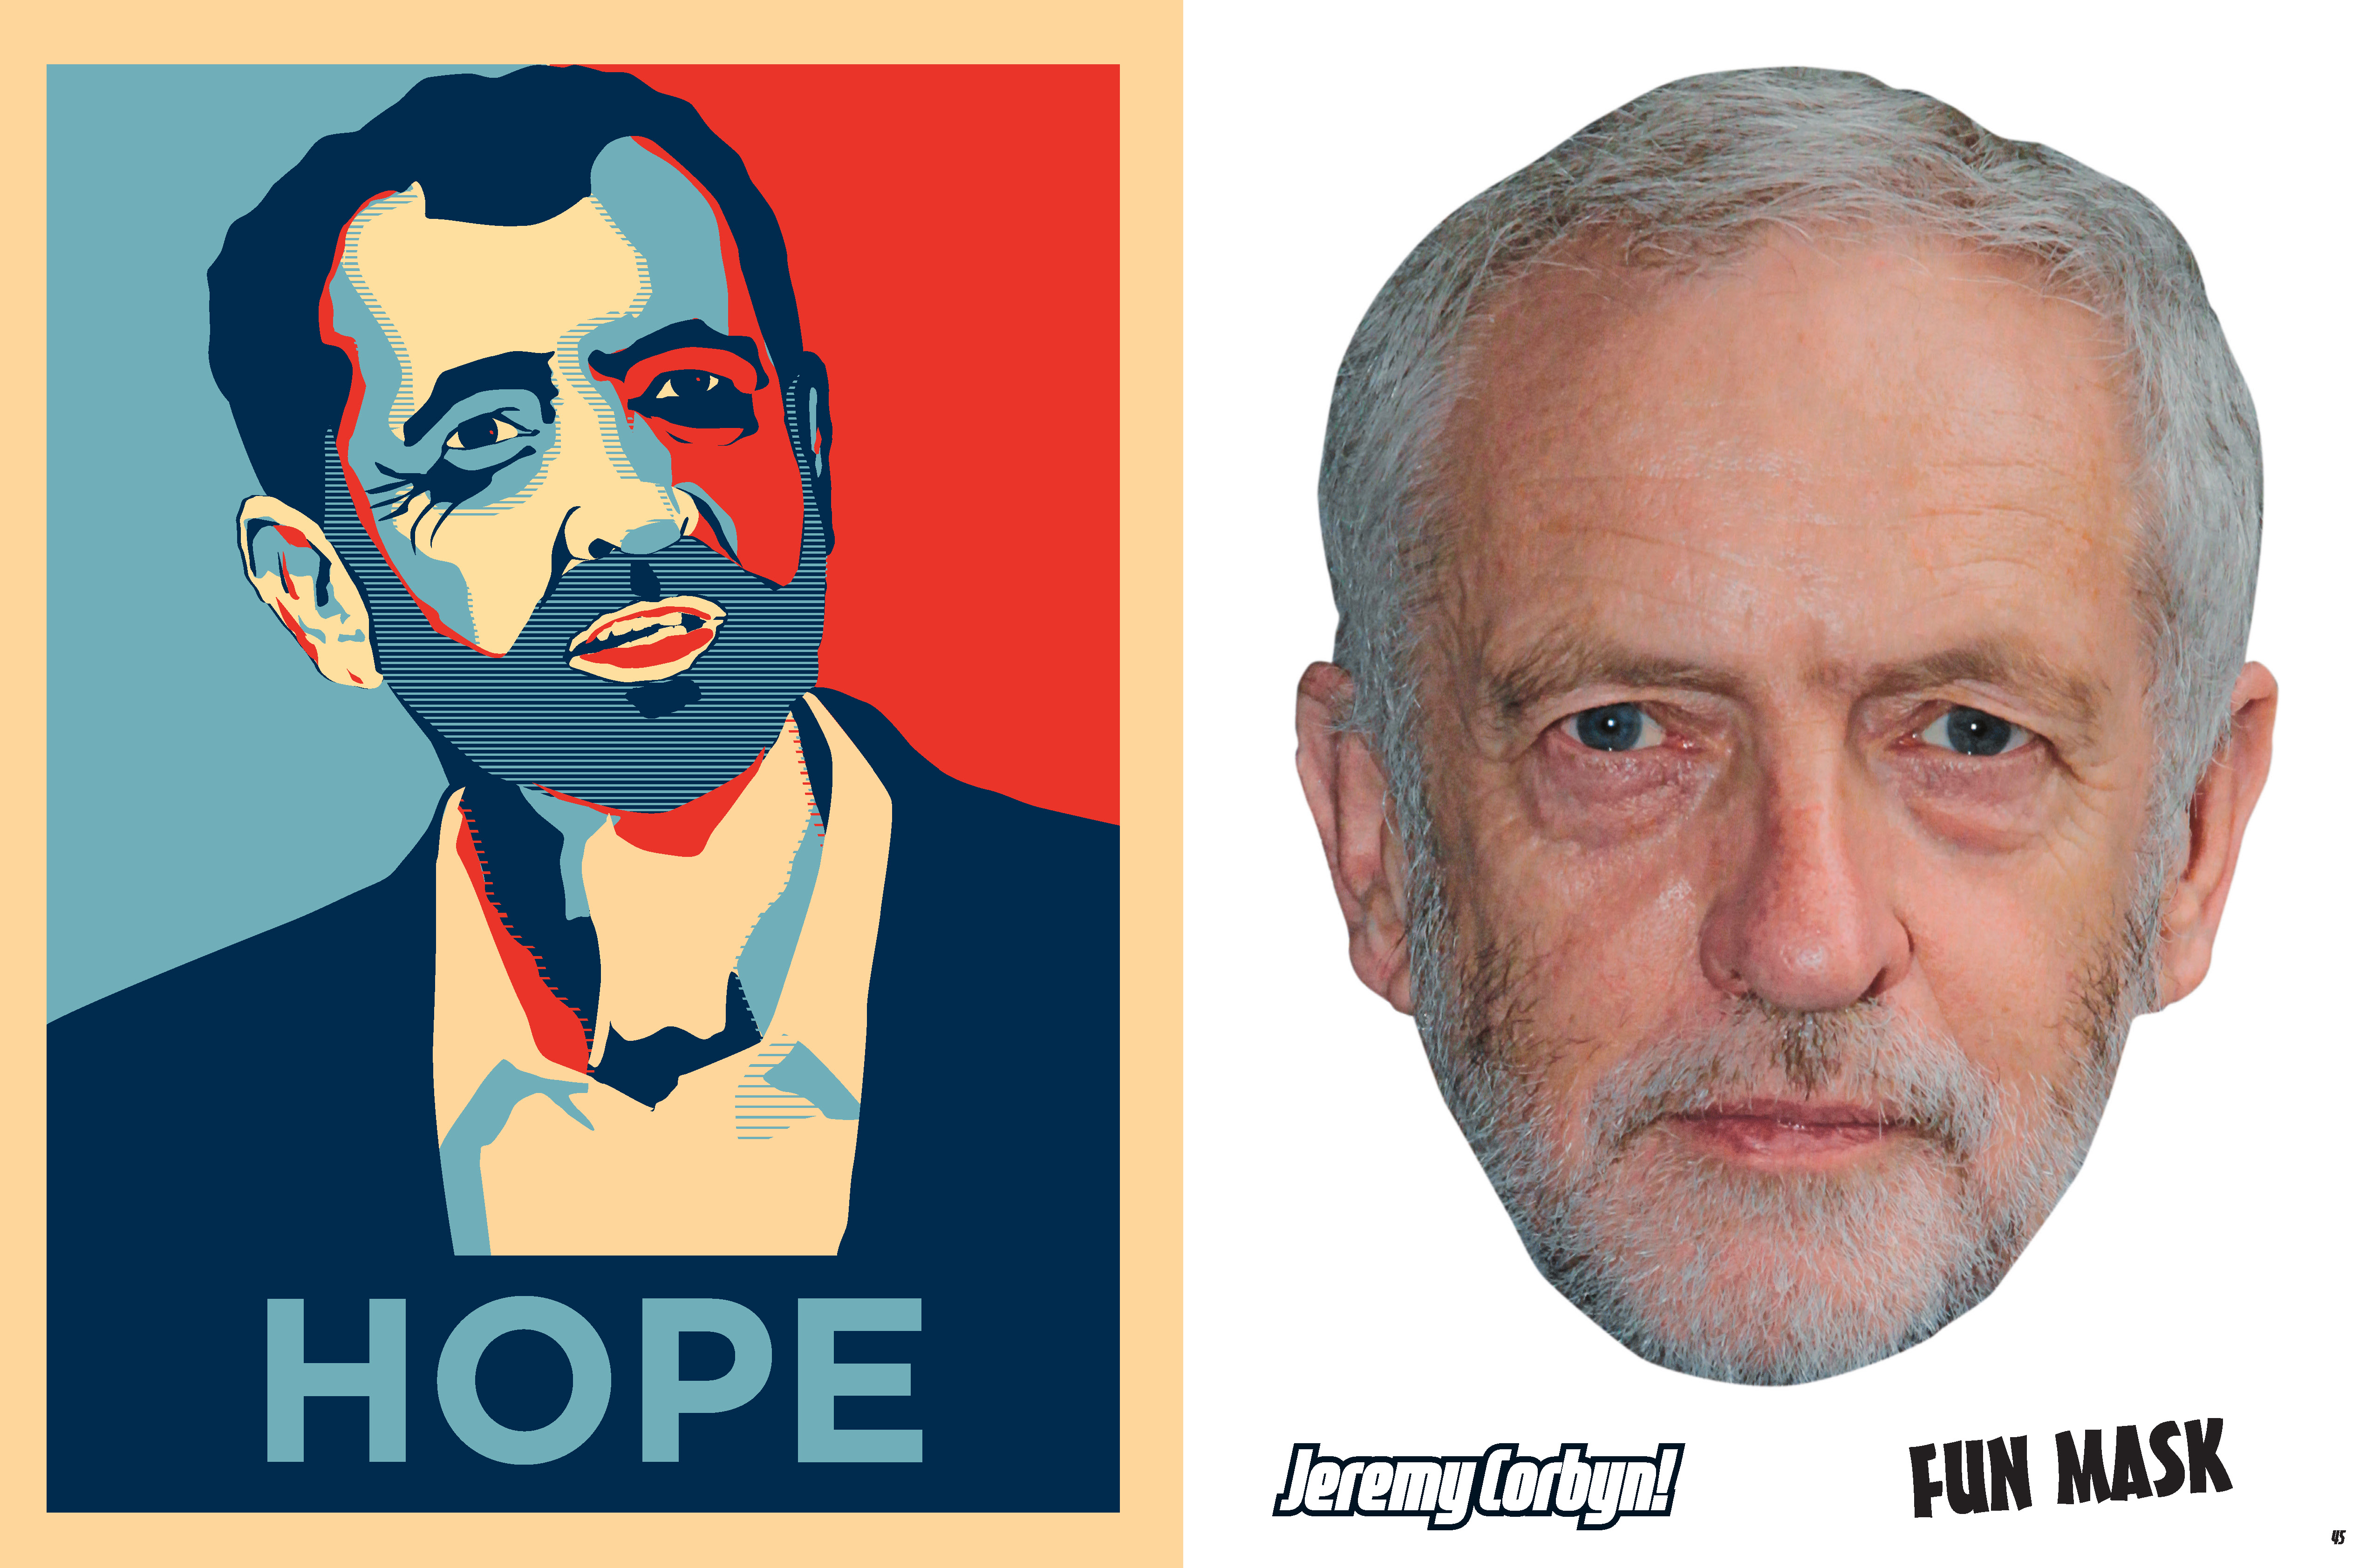 Jeremy Corbyn in the style of Barack Obama's Hope picture (Portico)